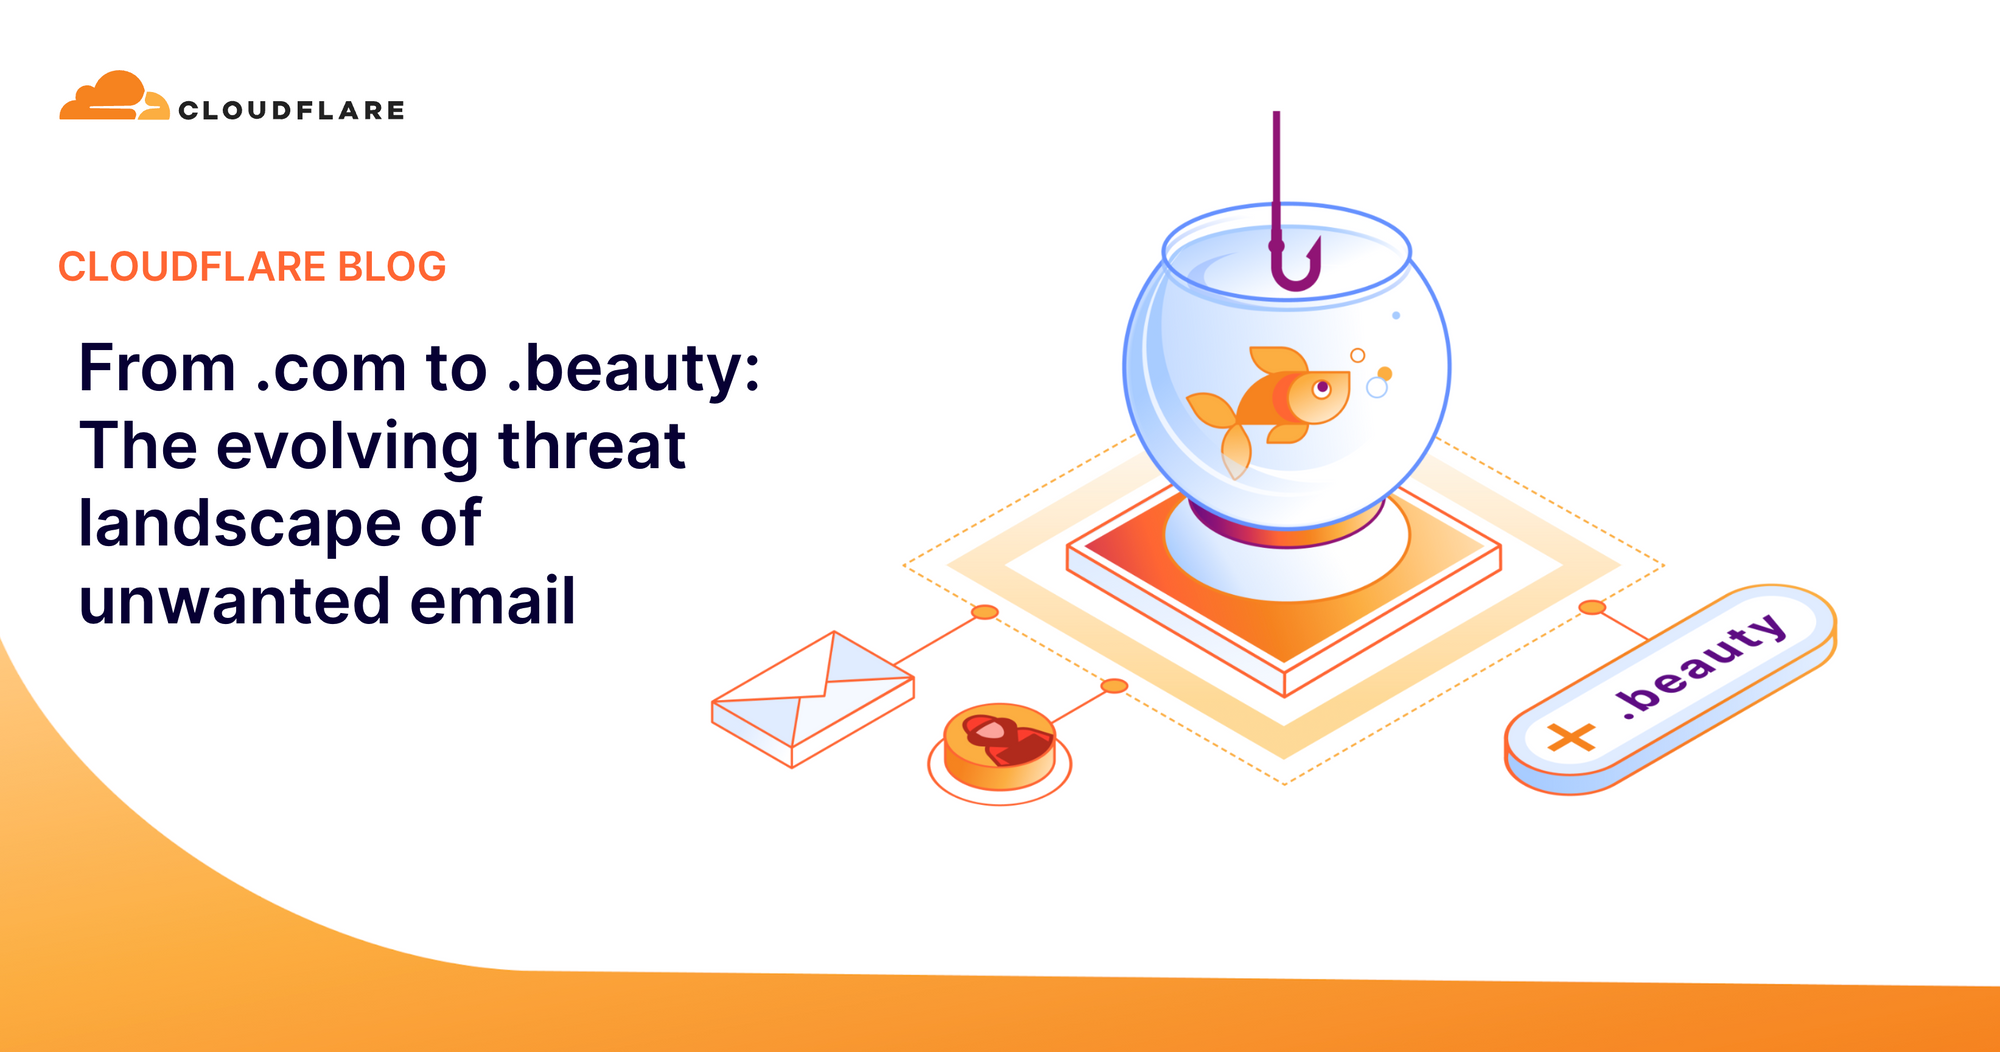 From .com to .beauty: The evolving threat landscape of unwanted email